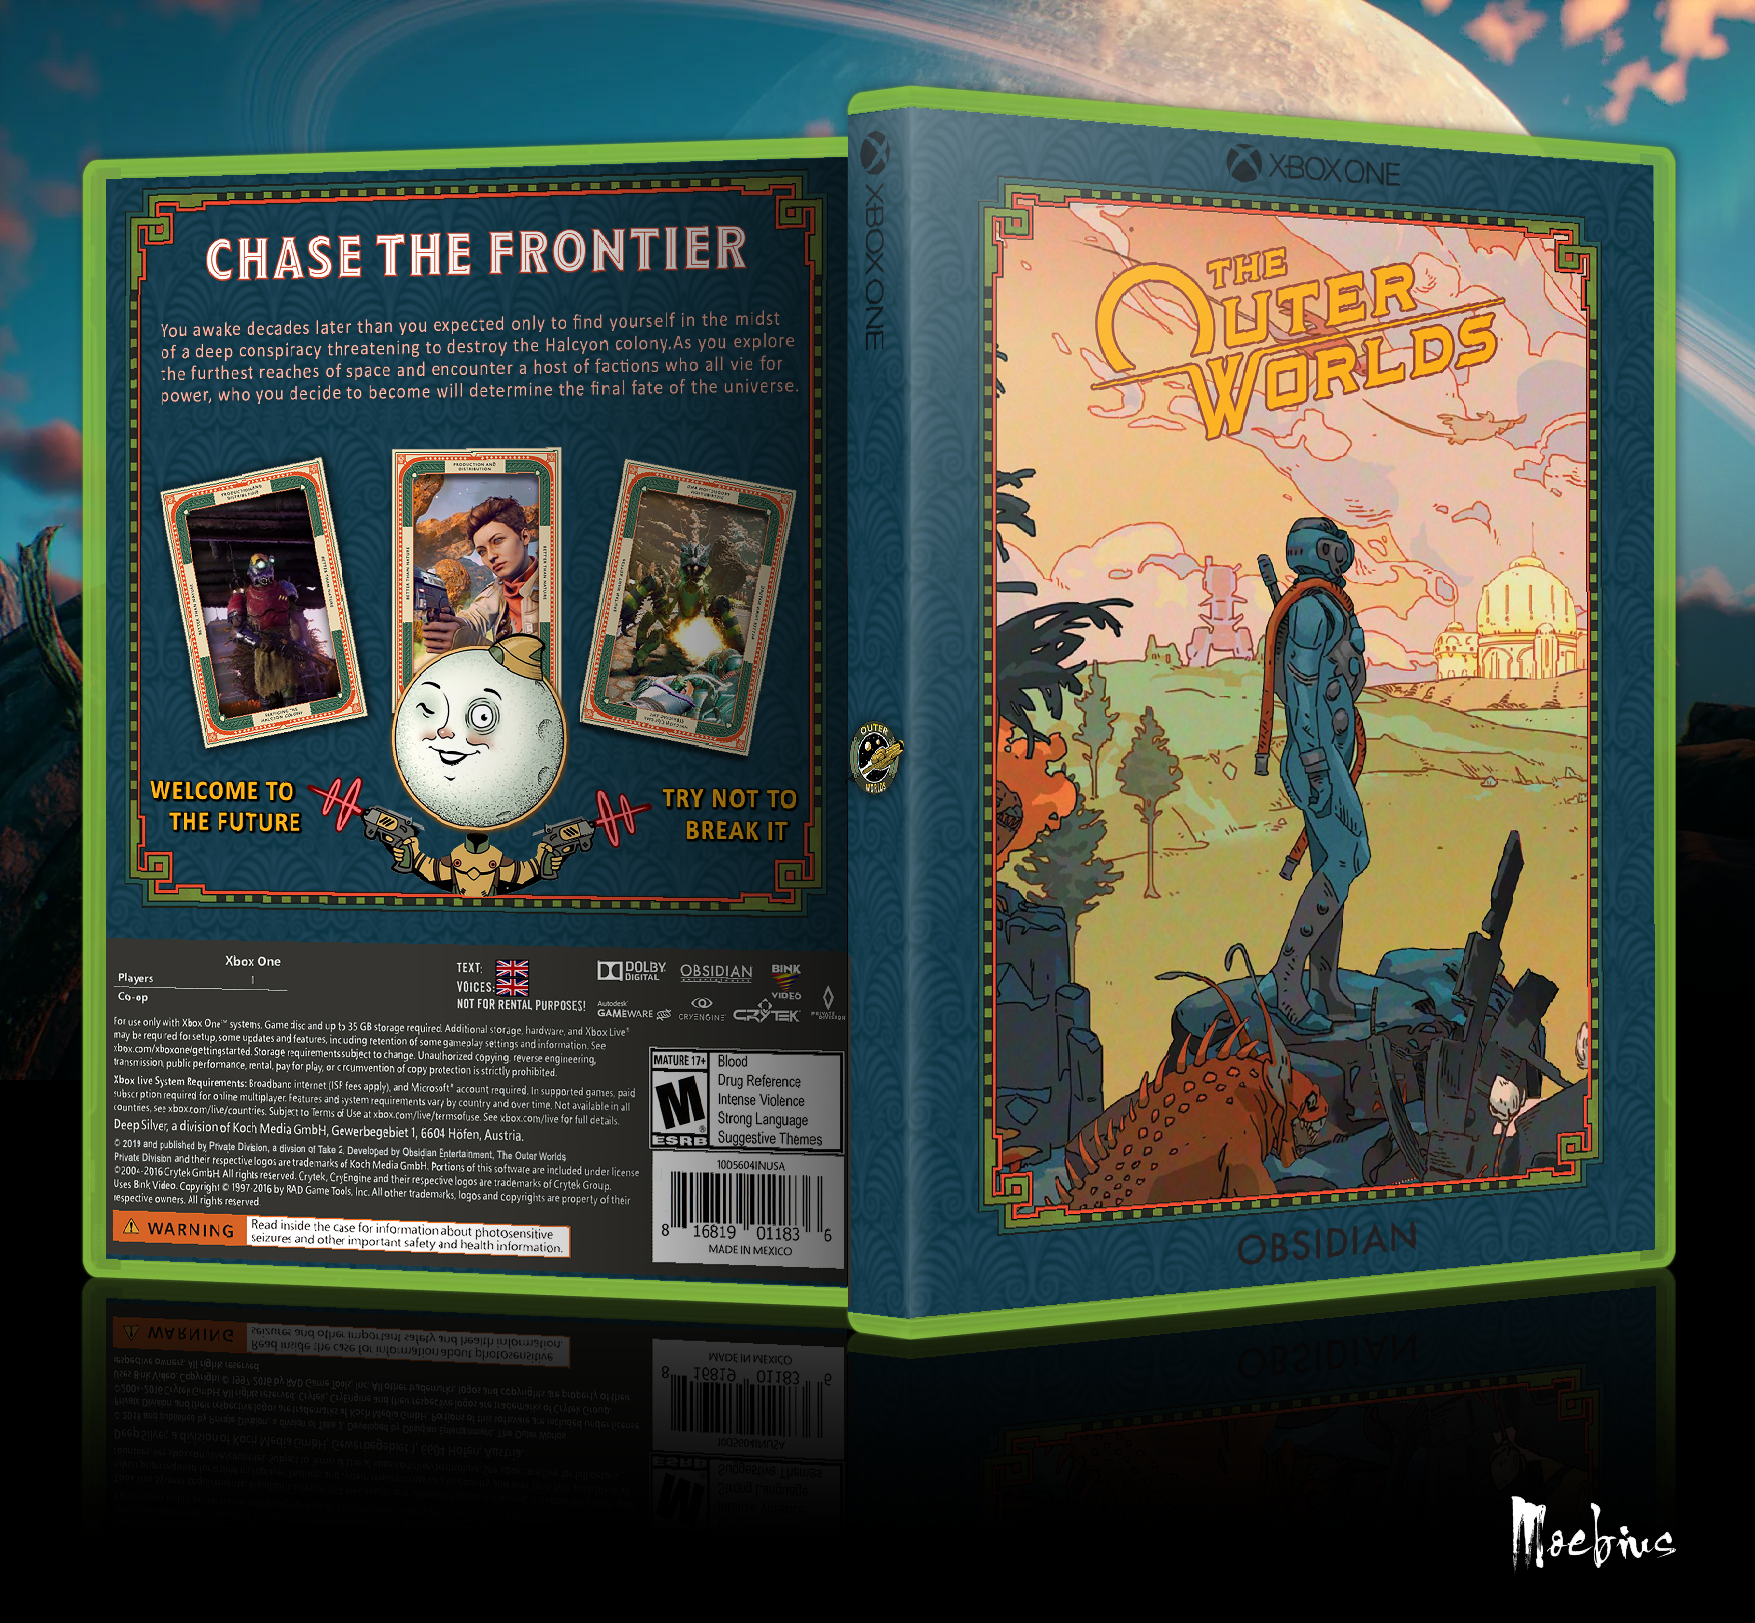 The Outer Worlds box cover